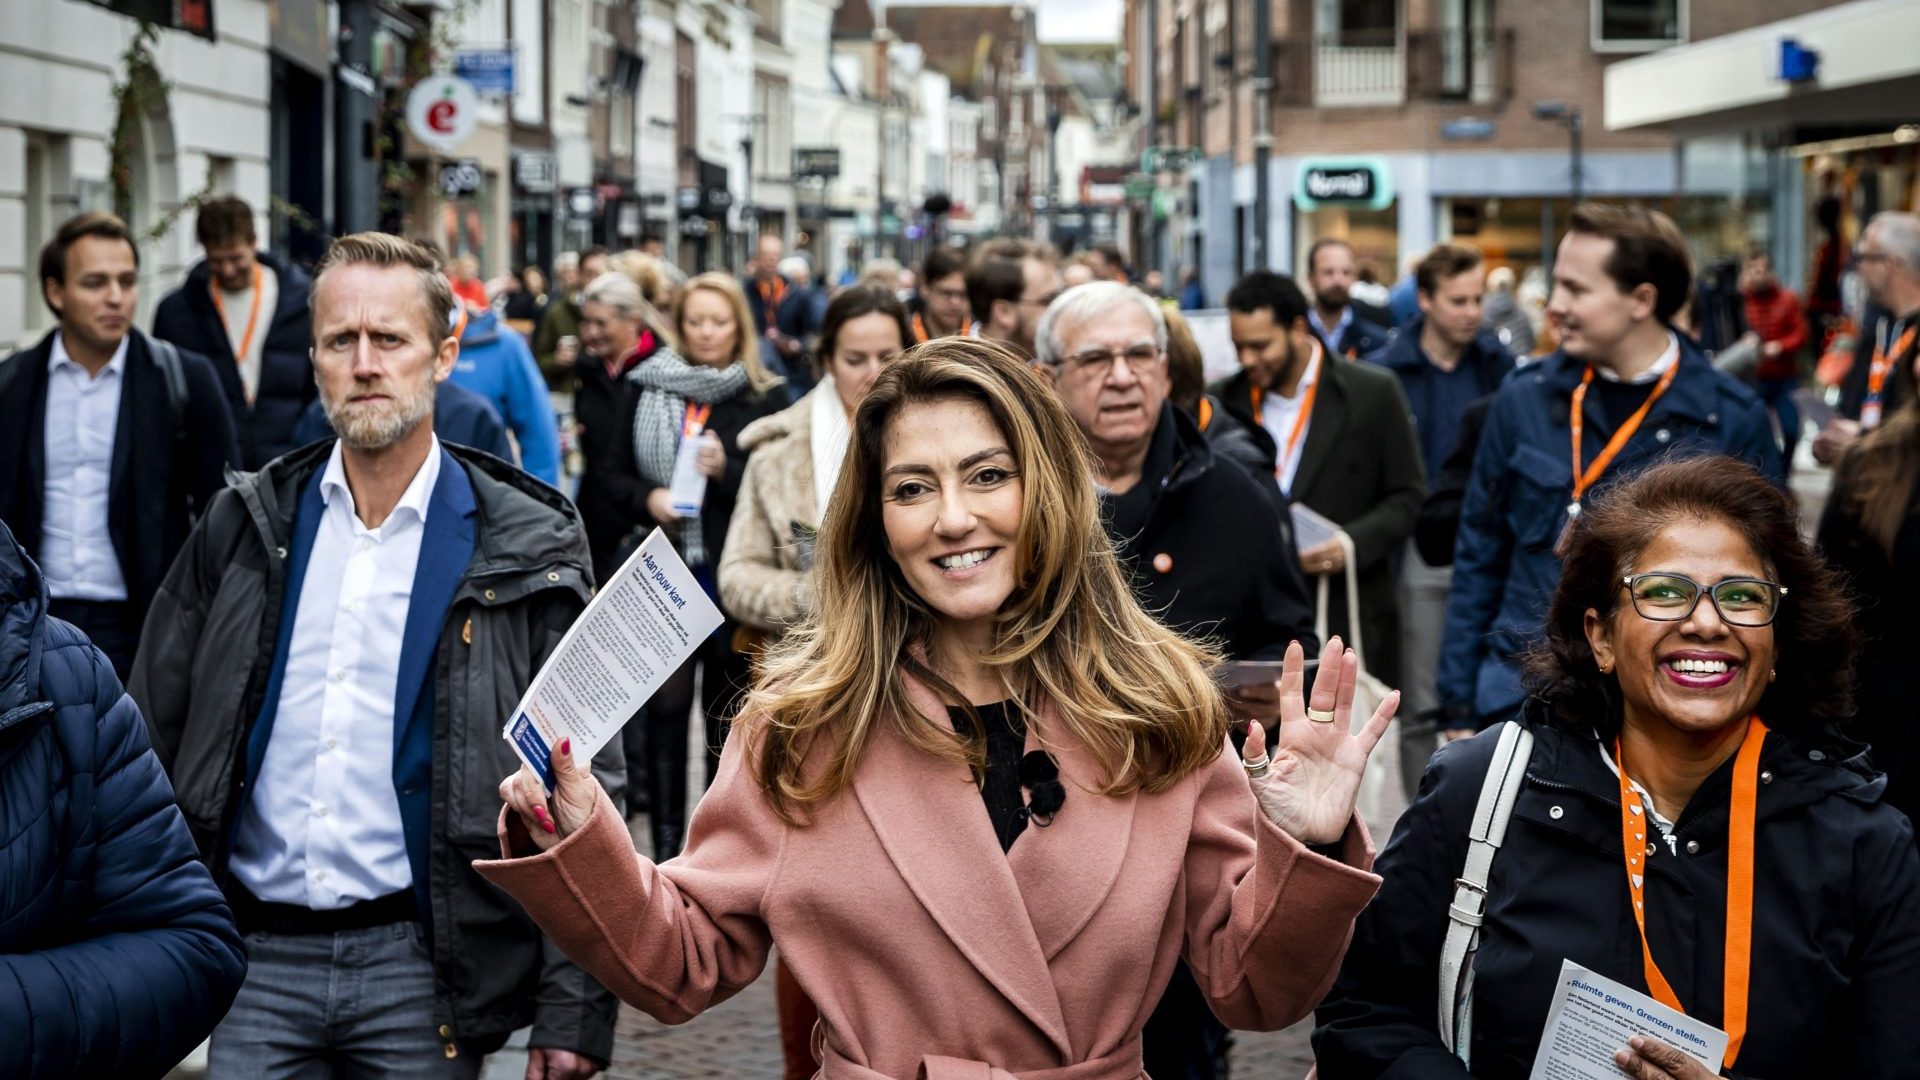 People's Party for Freedom and Democracy (VVD) Party leader Dilan Yesilgoz participates a VVD campaign for the House of Representatives elections in Amersfoort. Photo: REMKO DE WAAL/ANP/AFP via Getty Images